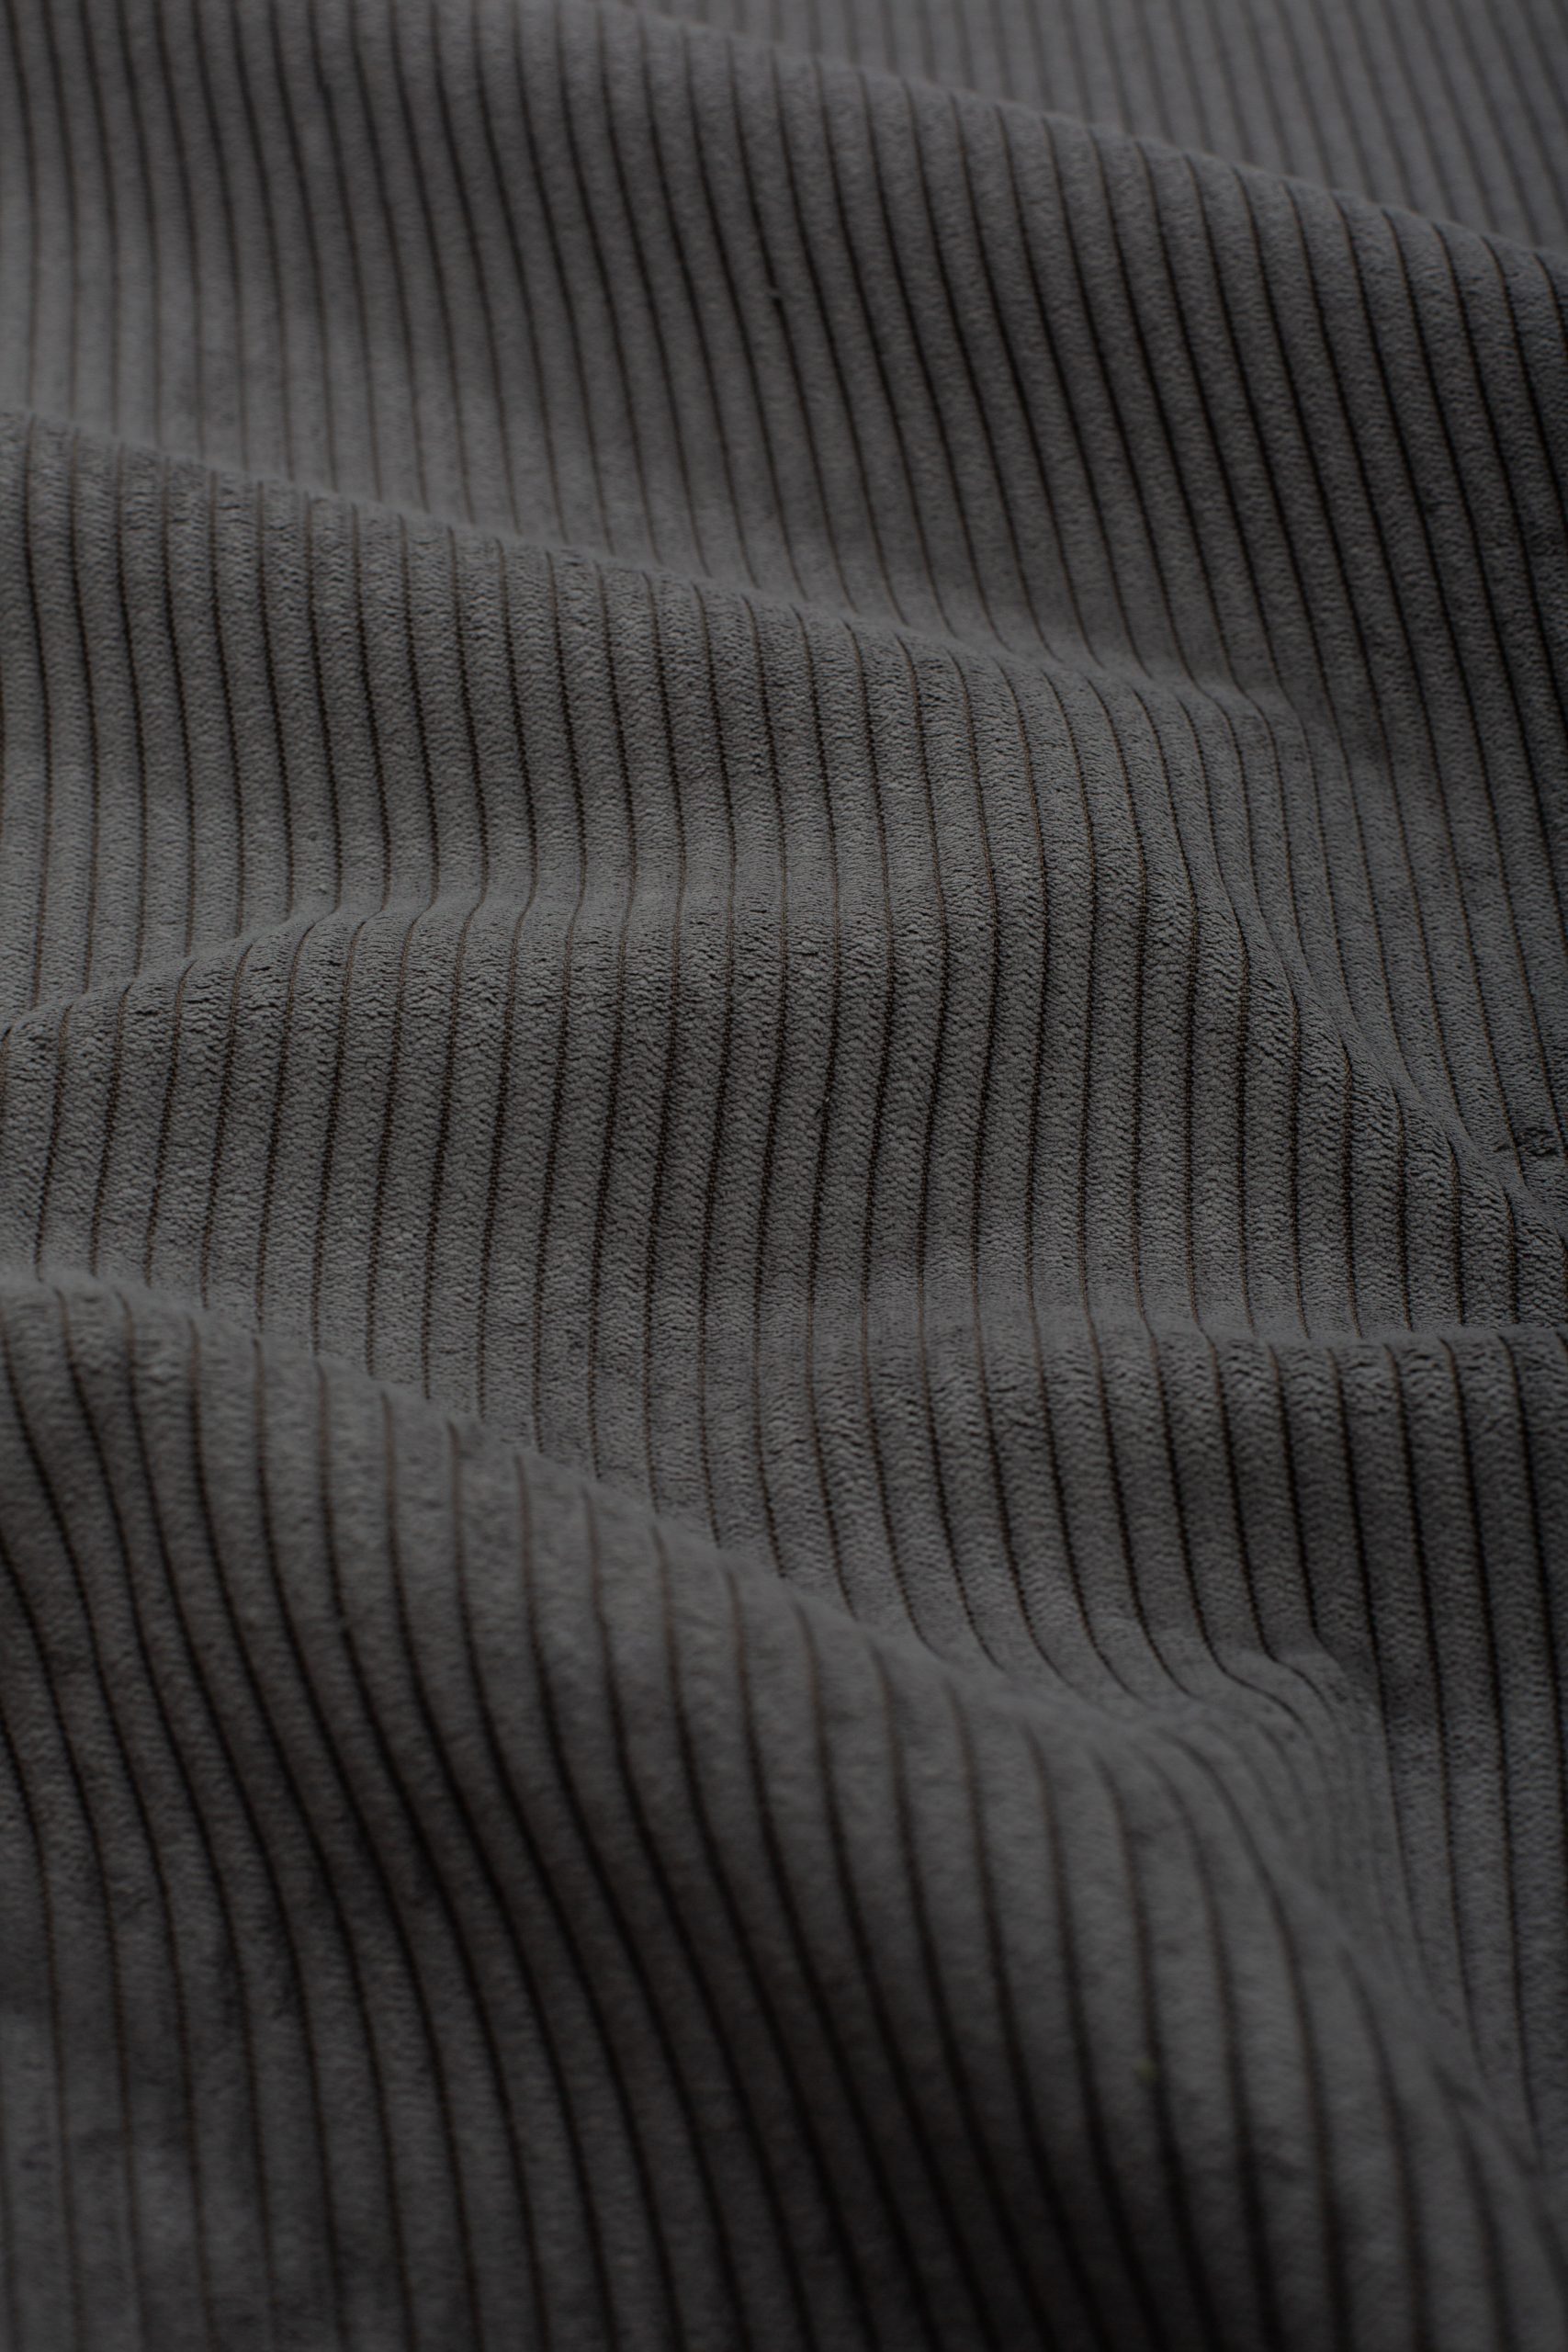 Relaxed Plains Lazy Graphite Fabric